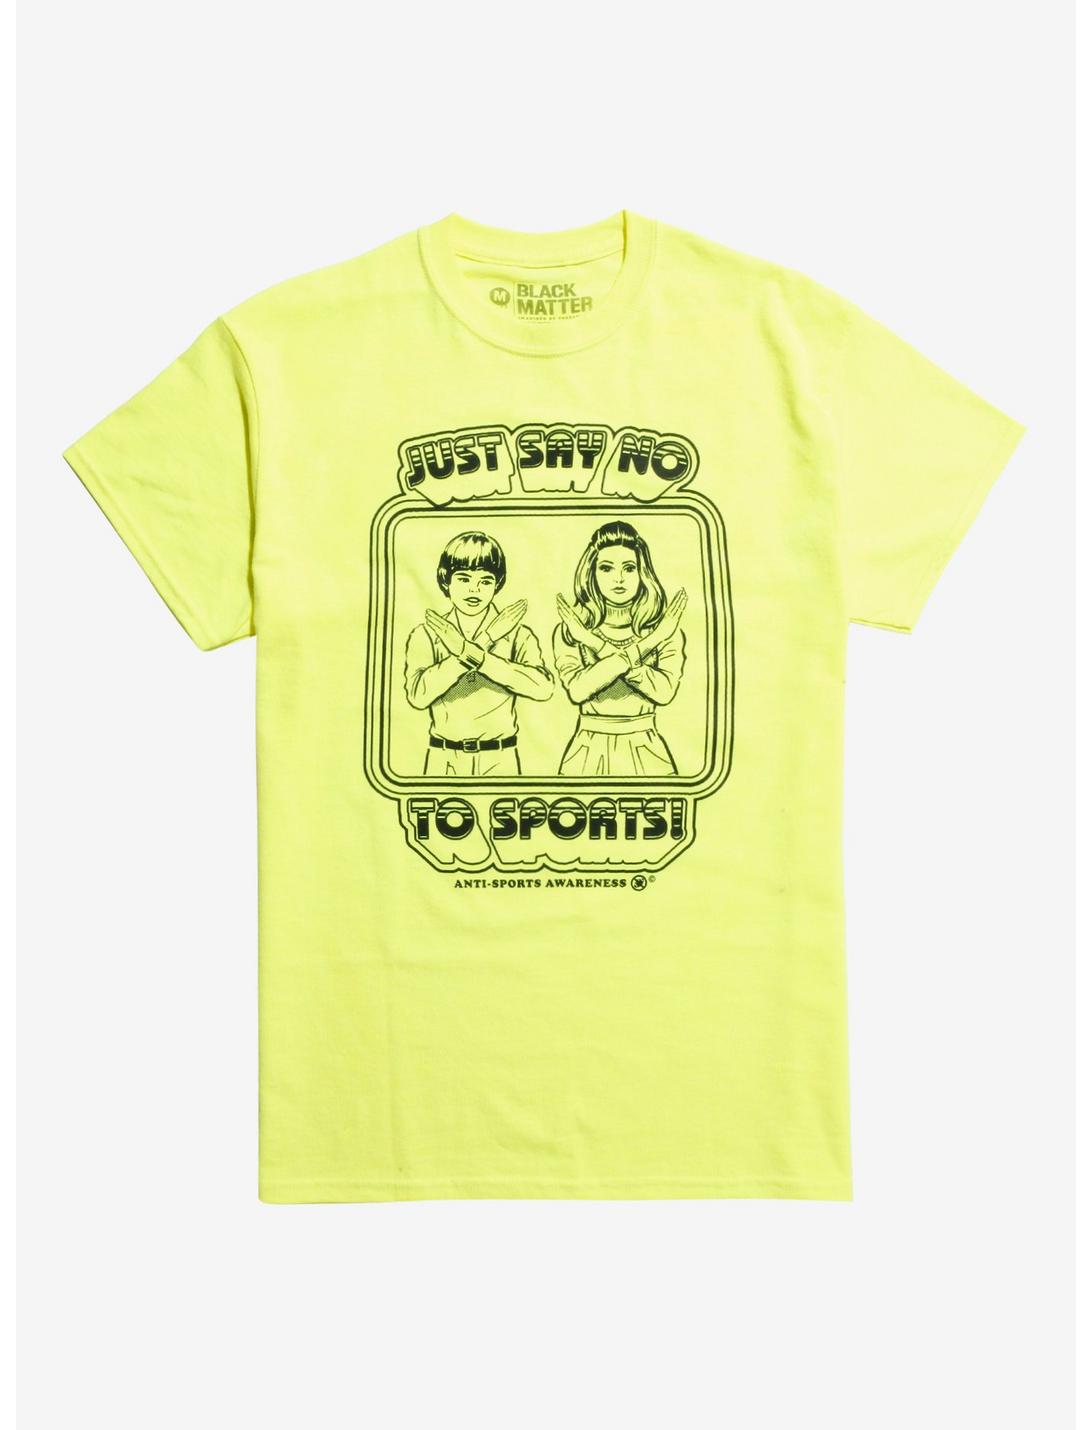 Say No To Sports Neon Yellow T-Shirt By Steven Rhodes Hot Topic ...